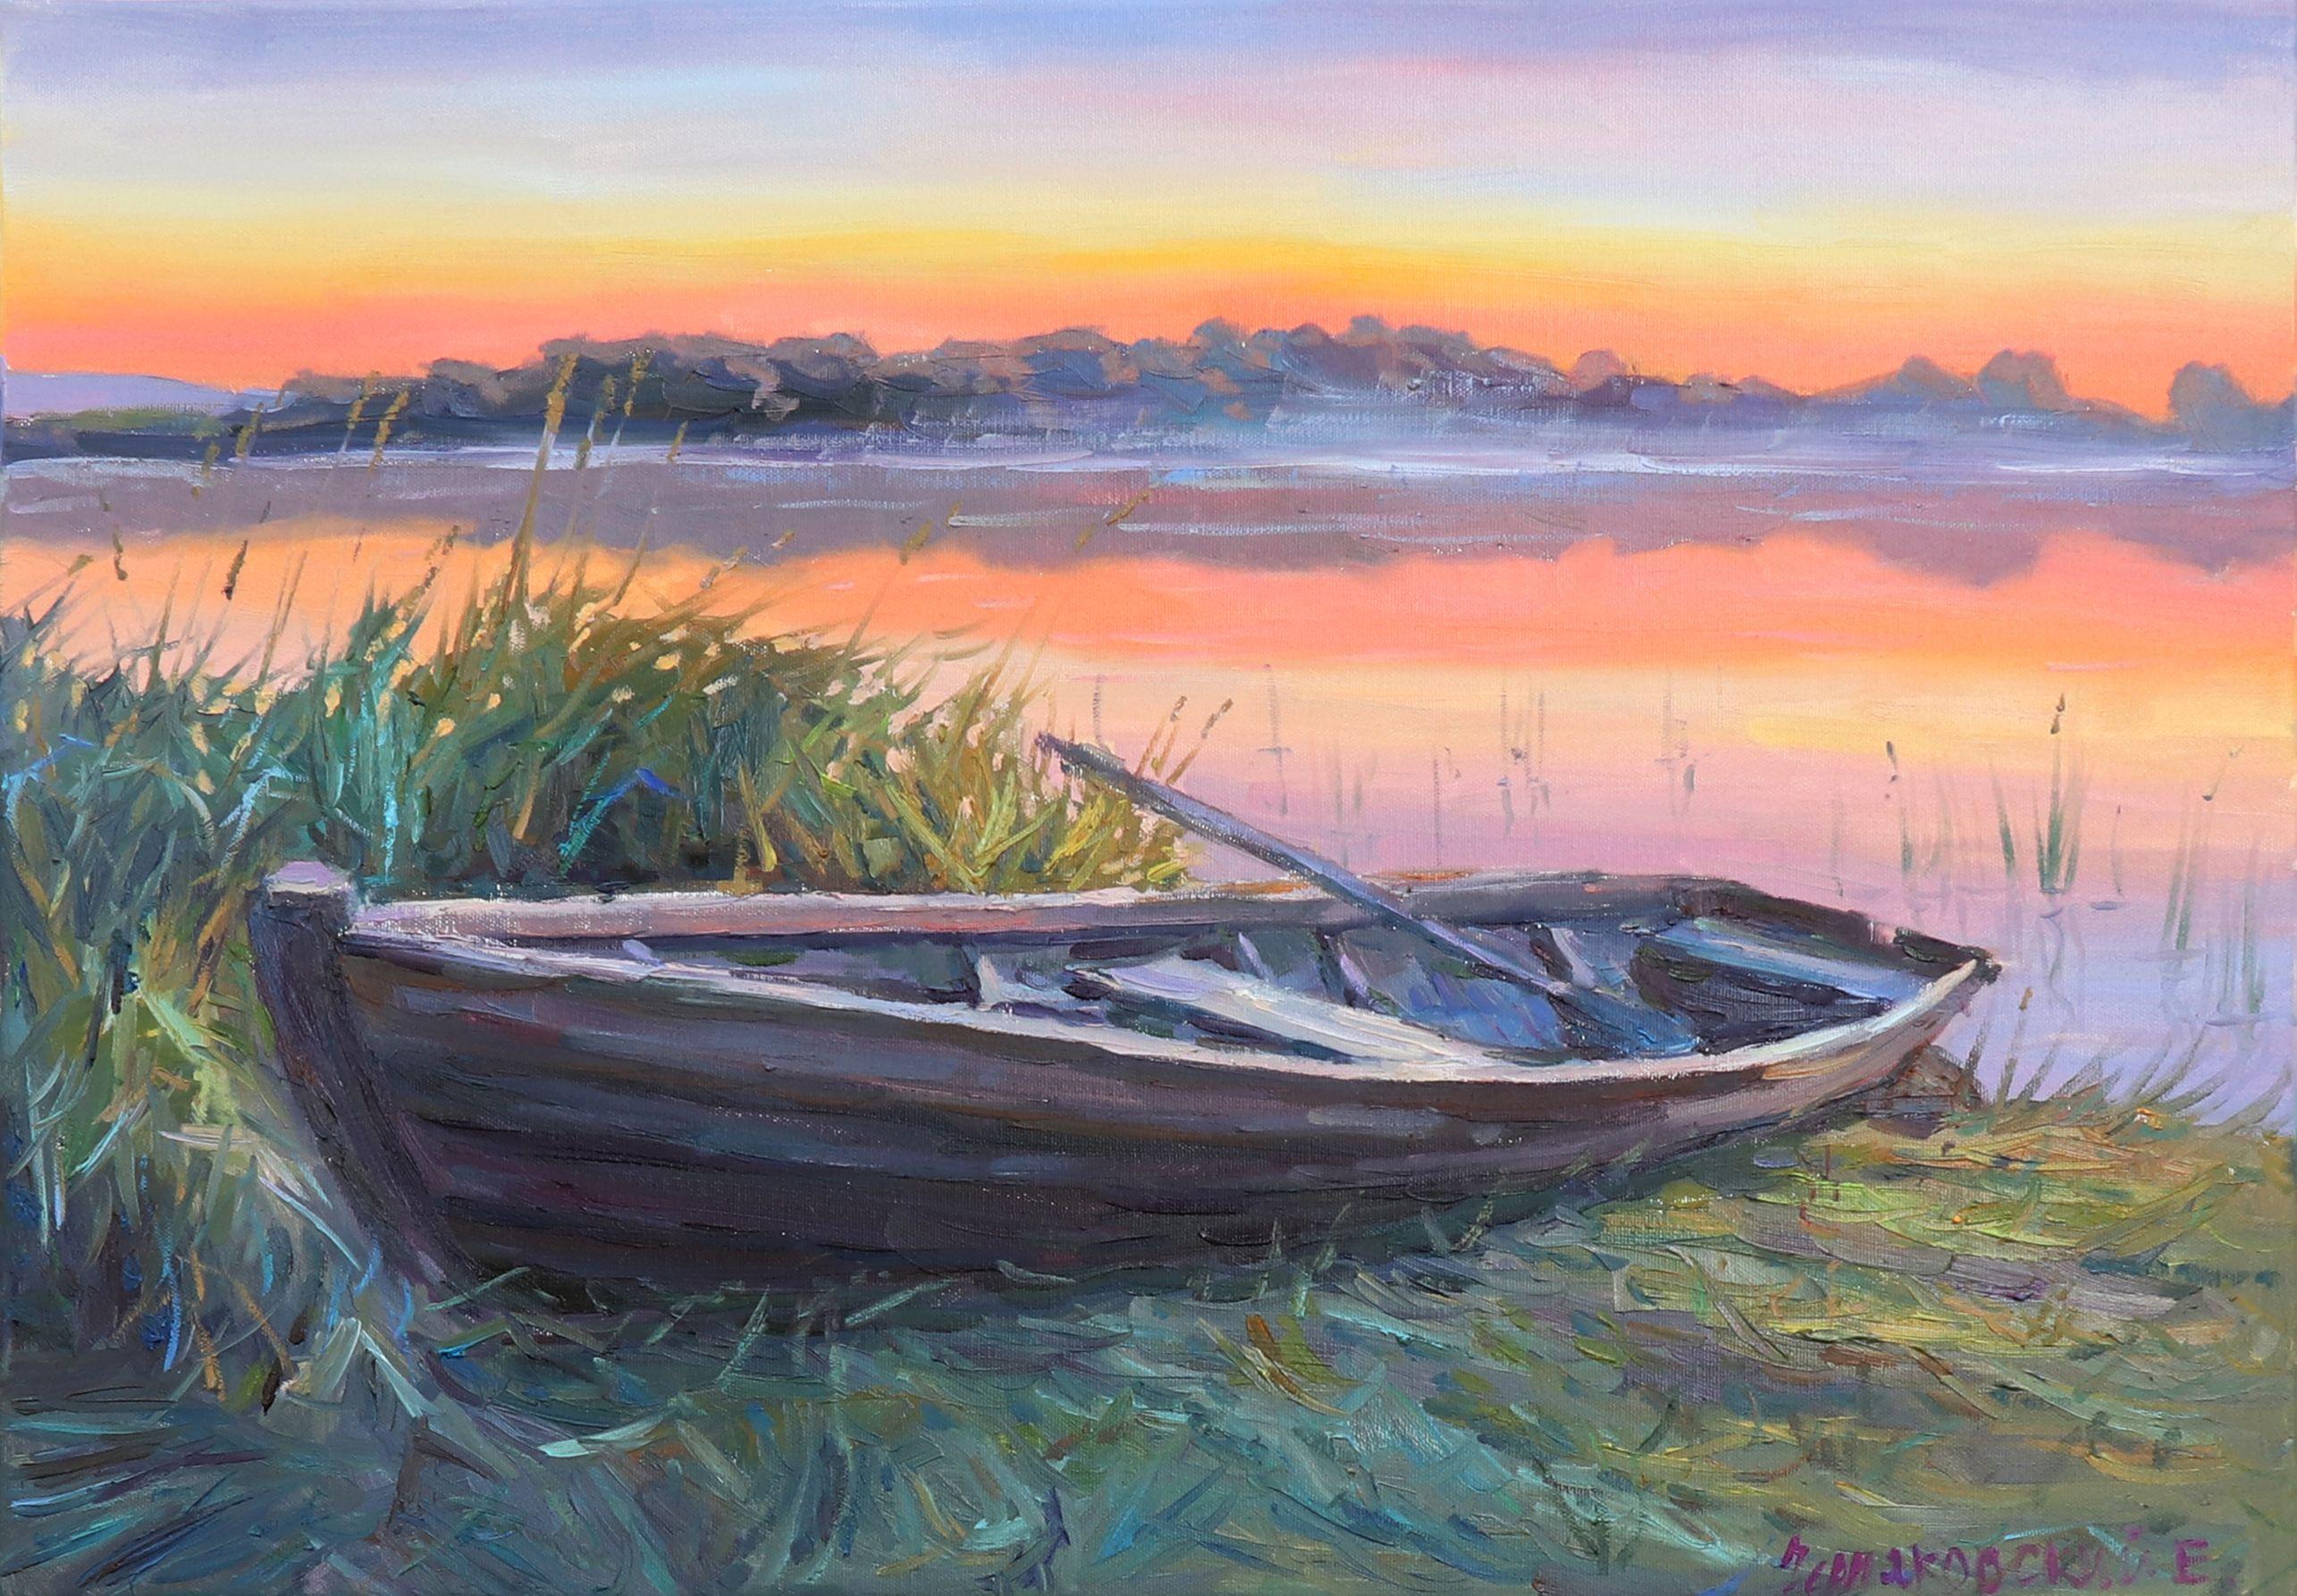 Original Oil painting by Ukrainian artist Evgeny Chernyakovsky    "Boat"  50.0 X 70.0 CM / 19.6 X 27.5 IN  HIGH QUALITY oil on canvas  Signed on the front and back  Dated 2023  Good condition  GUARANTEE OF AUTHENTICITY   :: Painting :: Impressionist